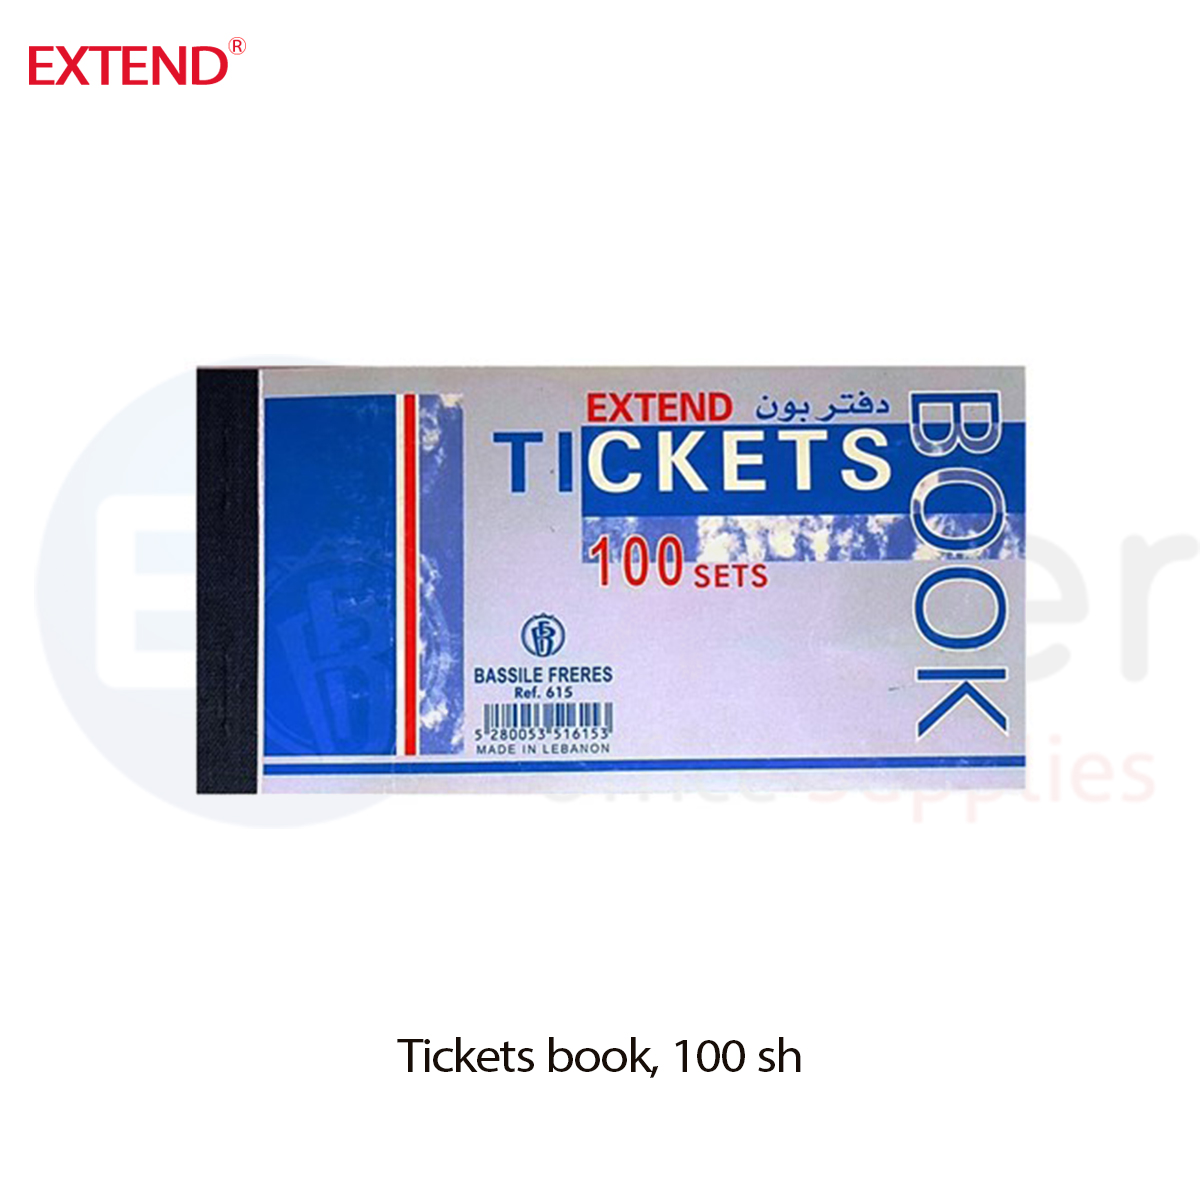 +Ticket book ,100 sheets